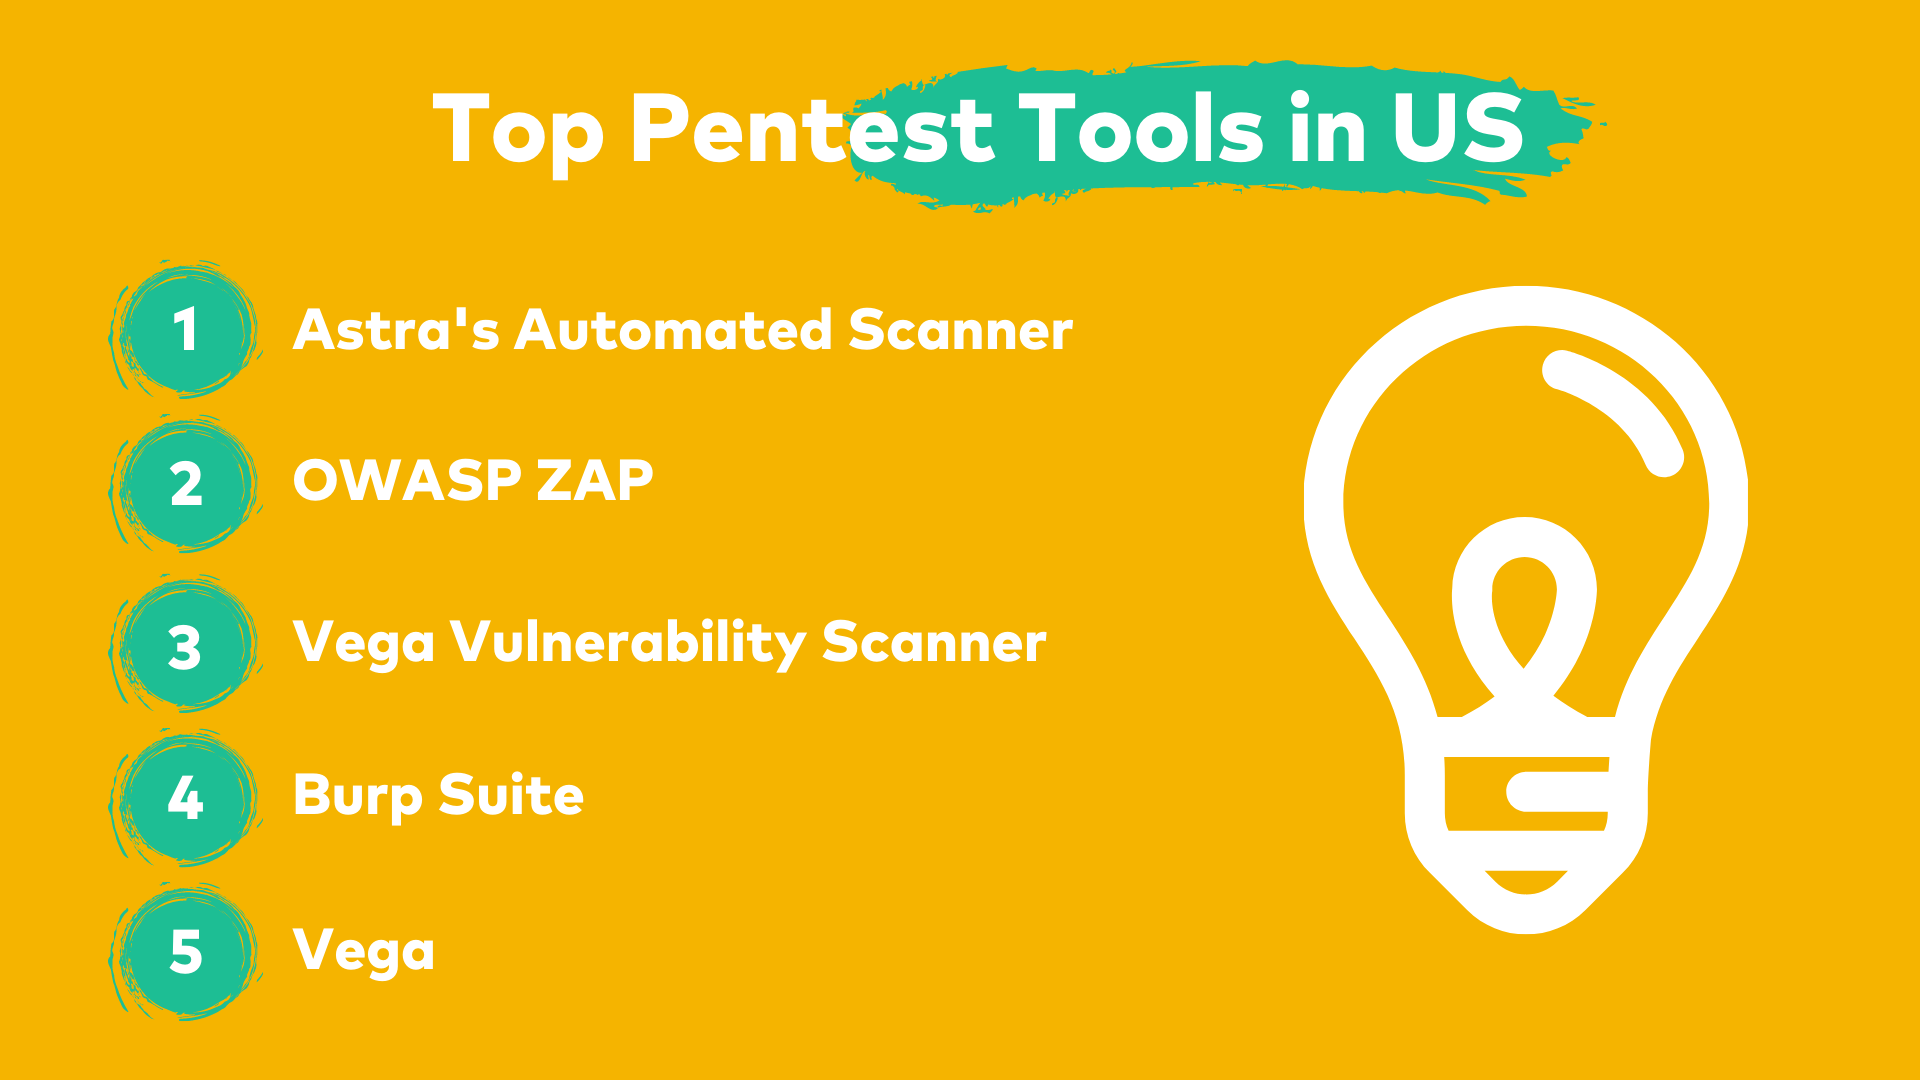 List of Top Pentest Tools in US